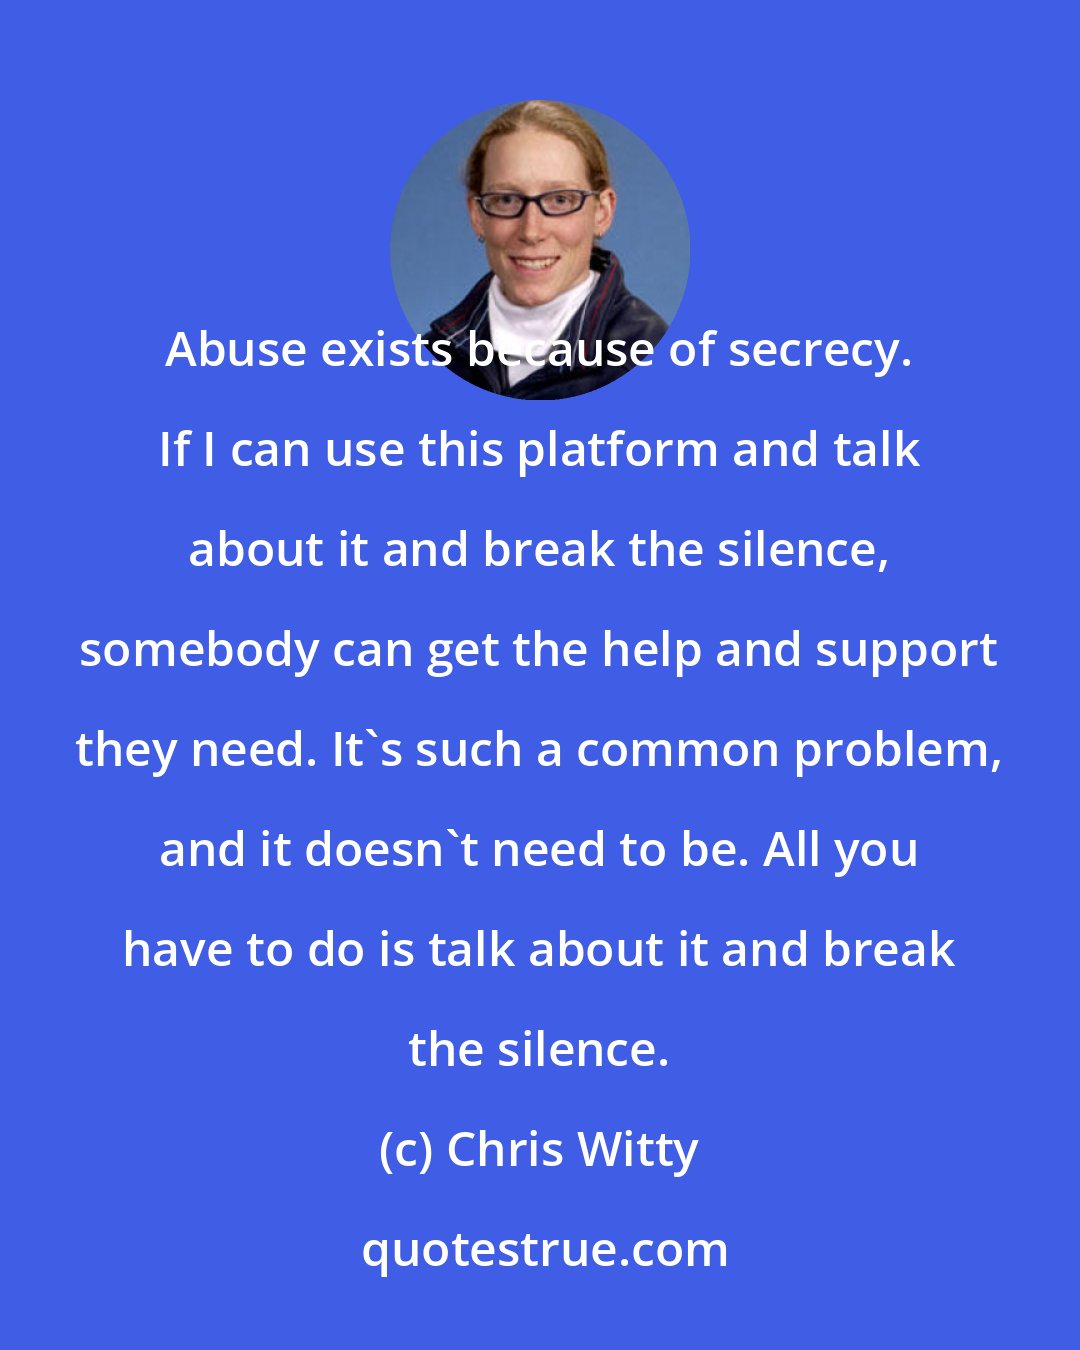 Chris Witty: Abuse exists because of secrecy. If I can use this platform and talk about it and break the silence, somebody can get the help and support they need. It's such a common problem, and it doesn't need to be. All you have to do is talk about it and break the silence.